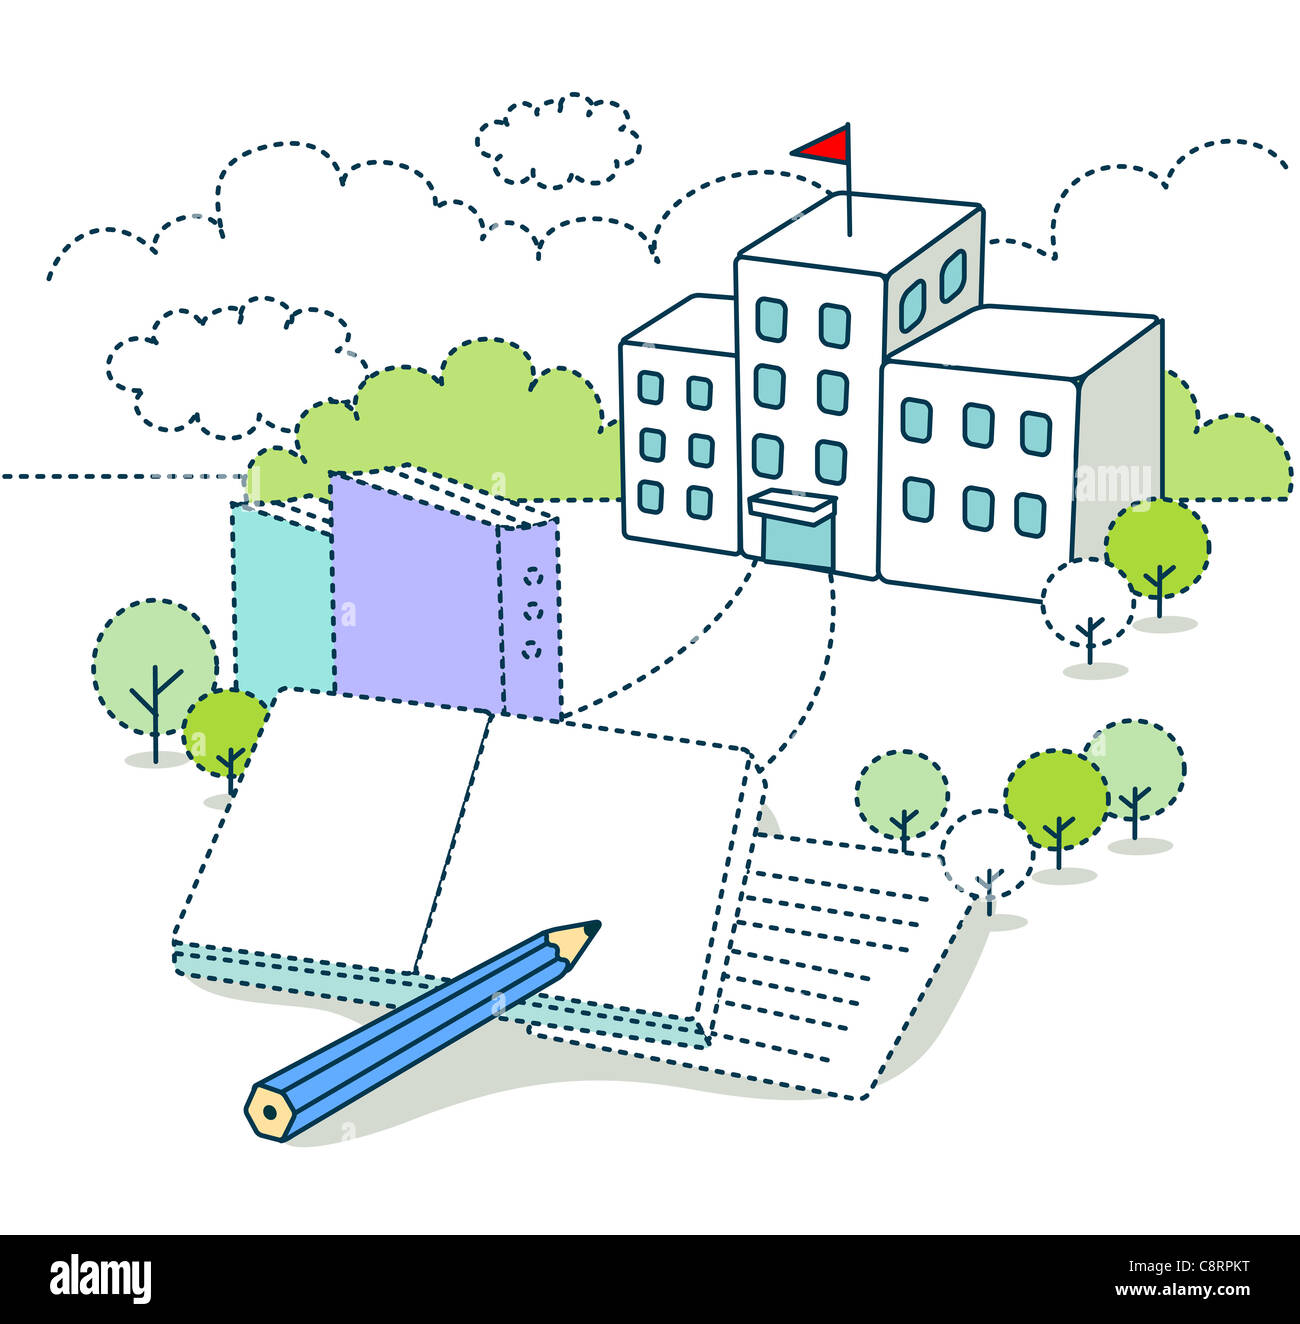 Illustration on education building and books Stock Photo